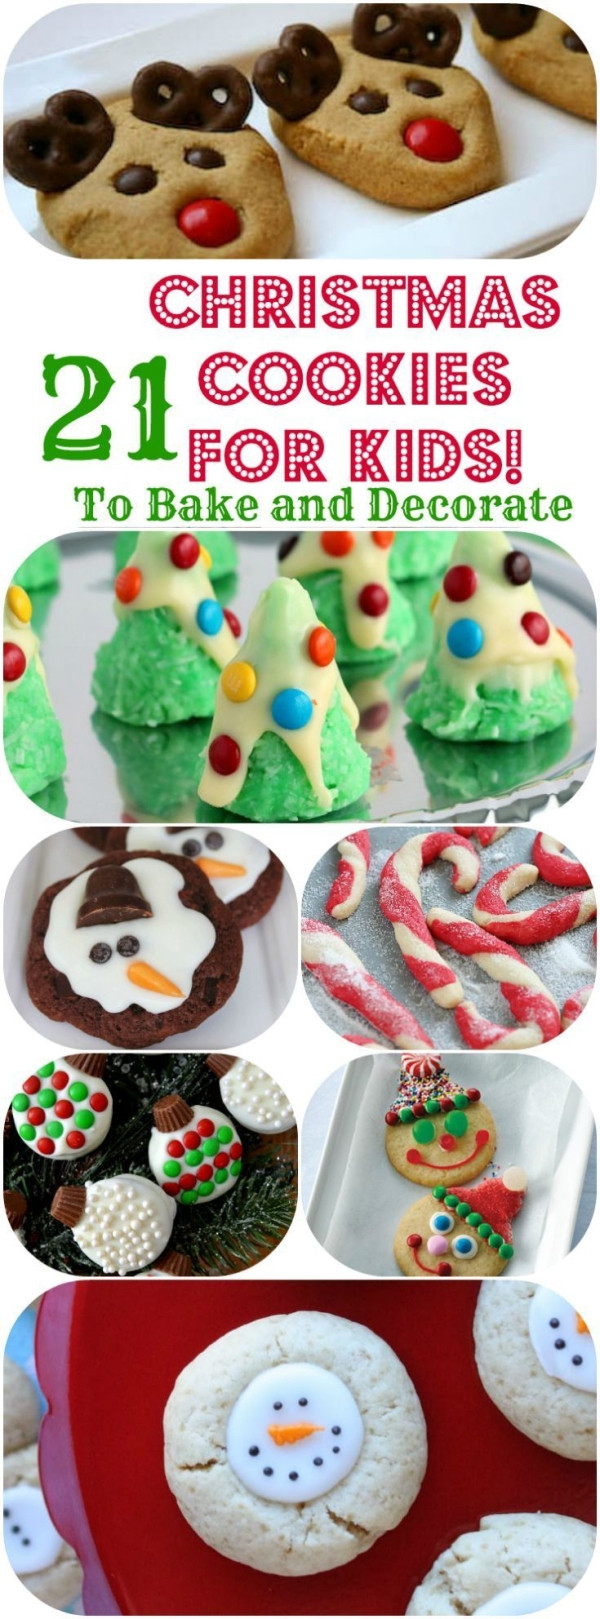 Christmas Cookies For Kids
 Easy Christmas Cookie recipes for Kids to Bake or Decorate